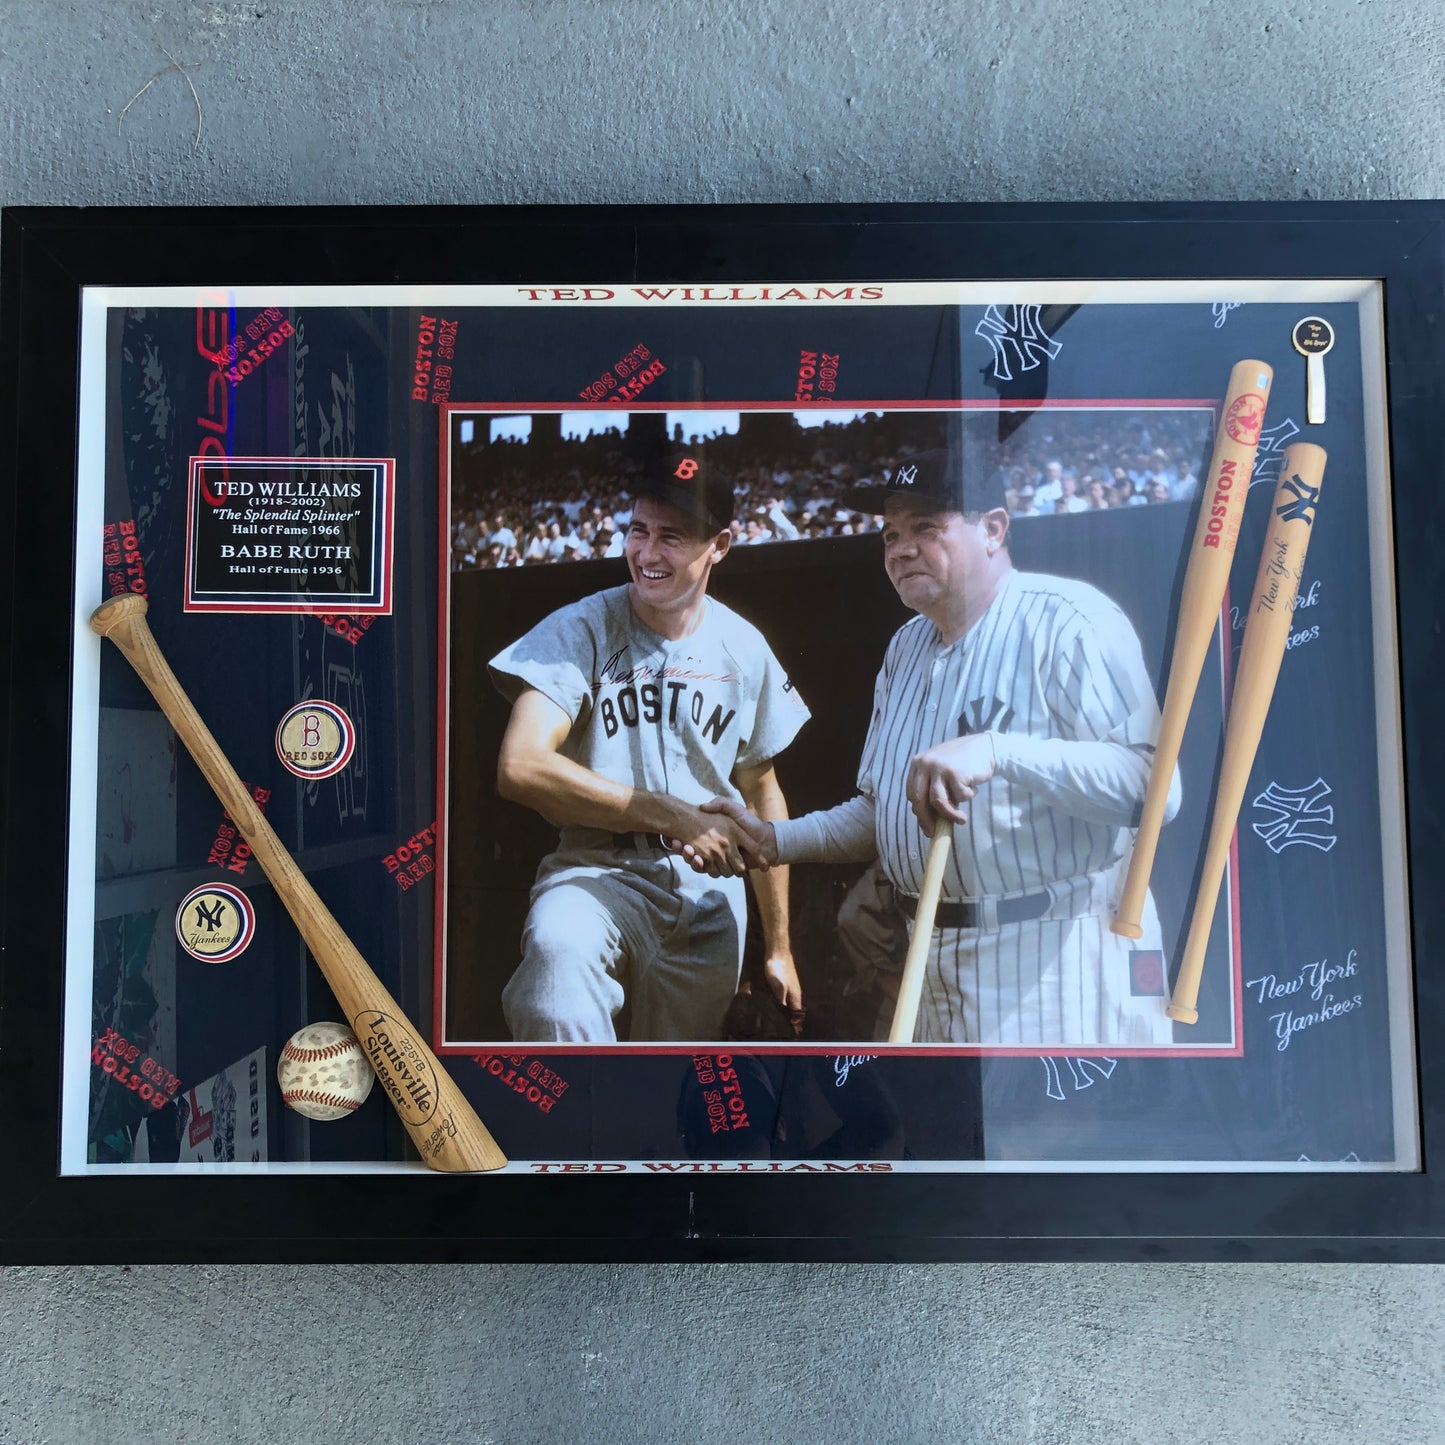 Ted Williams Autographed Photo with Babe Ruth